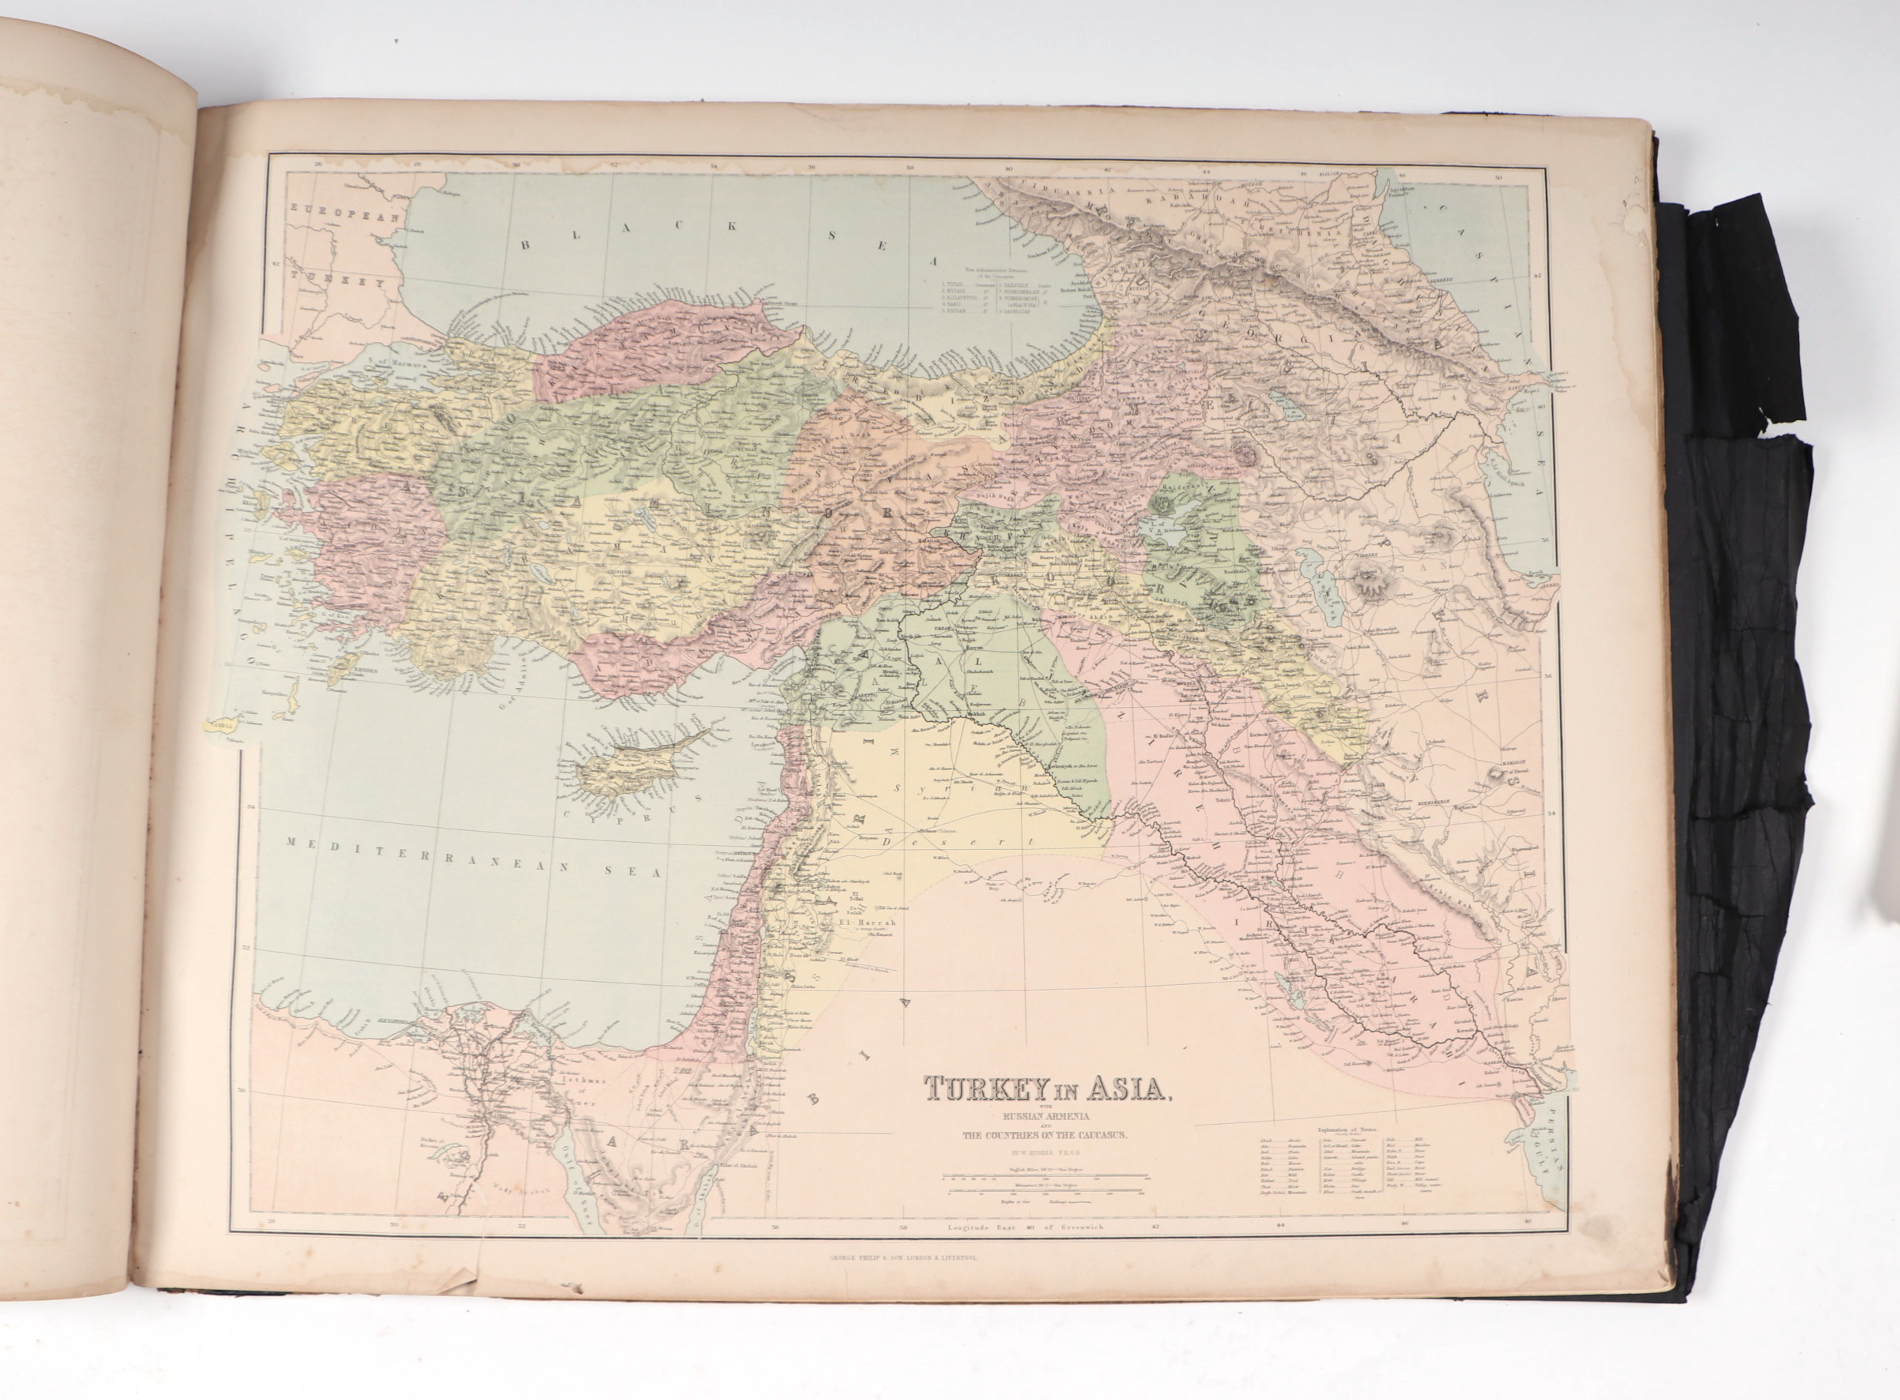 A late 19th century J. Bartholomew World Atlas published by George Philip & Son, London & Liverpool, - Image 4 of 5